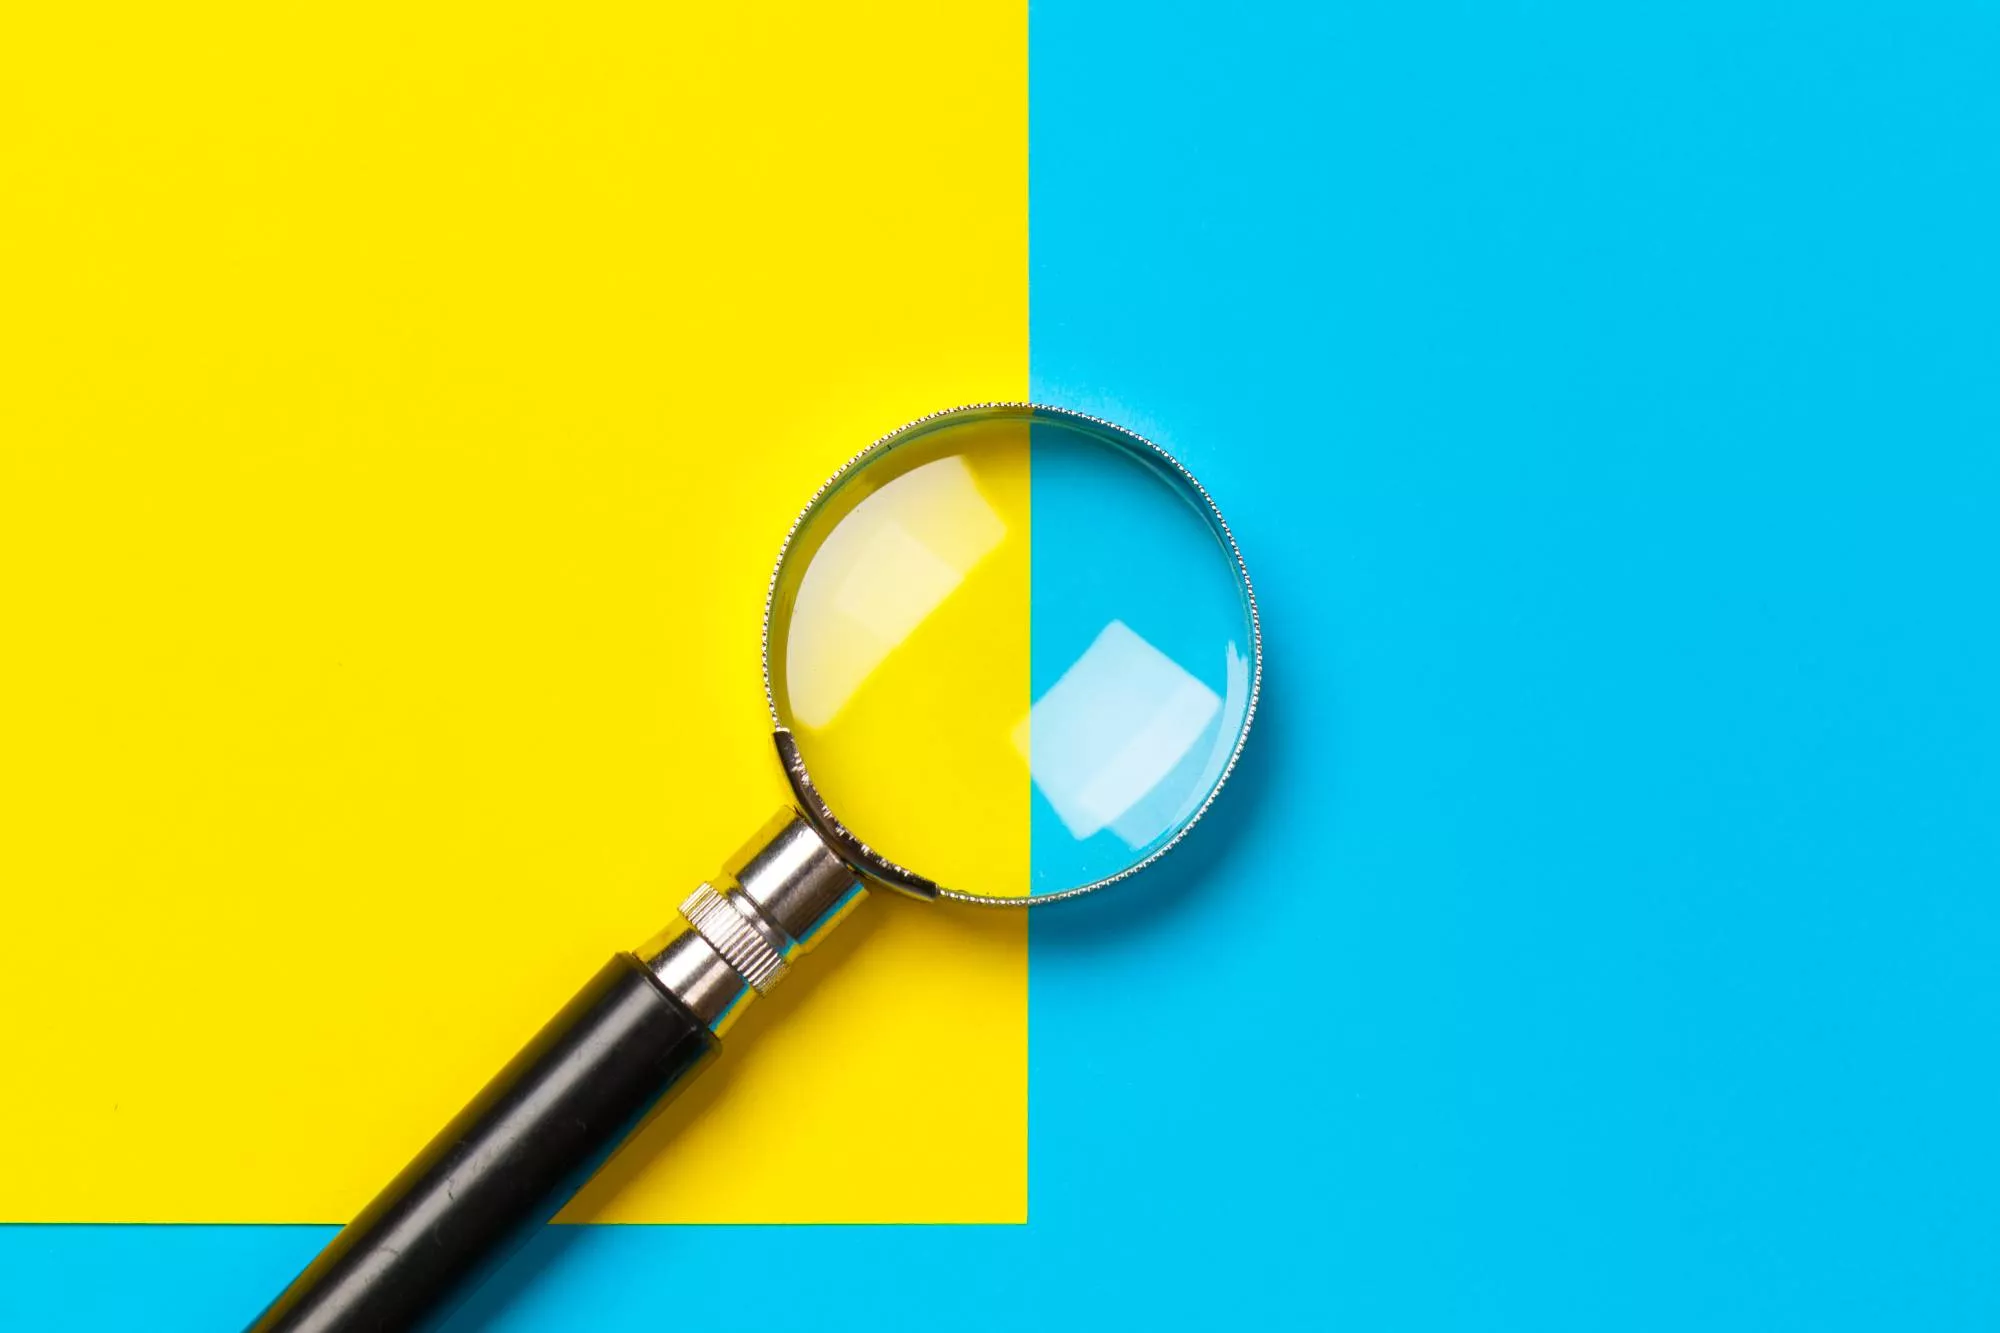 a maginifying glass on a blue and yellow background that will be used for check verification